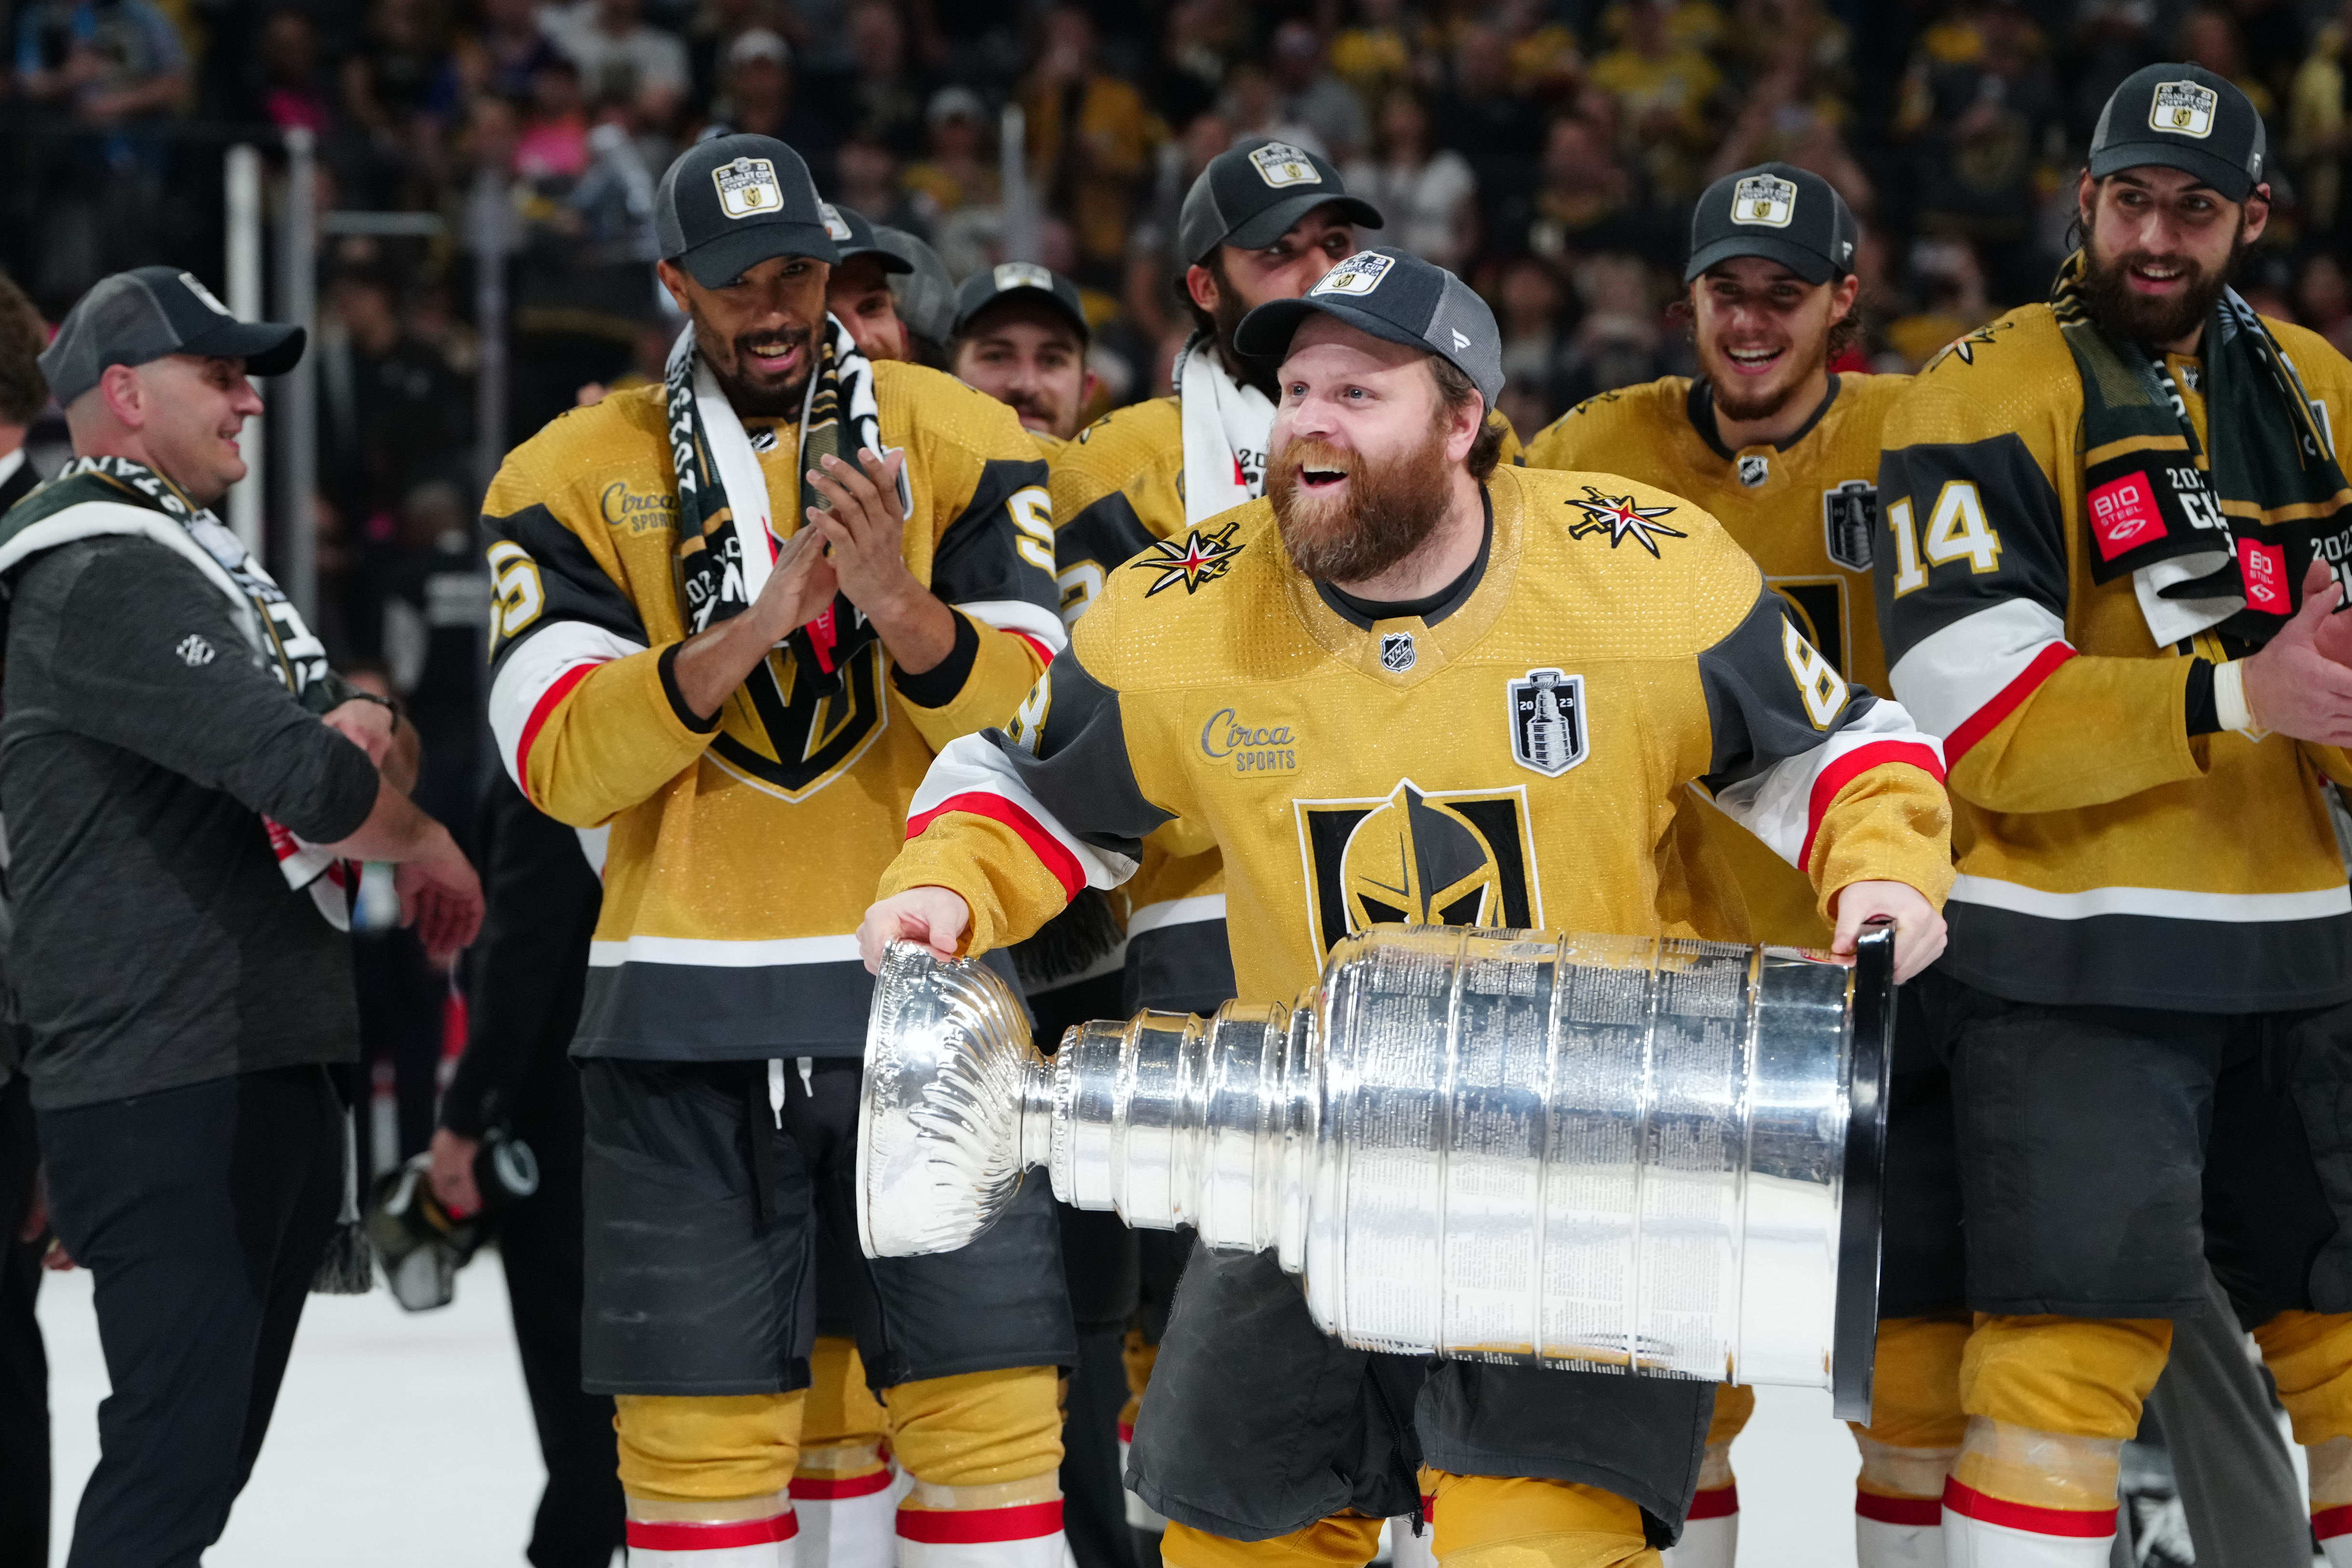 Insider reveals blockbuster trade that almost sent Phil Kessel to